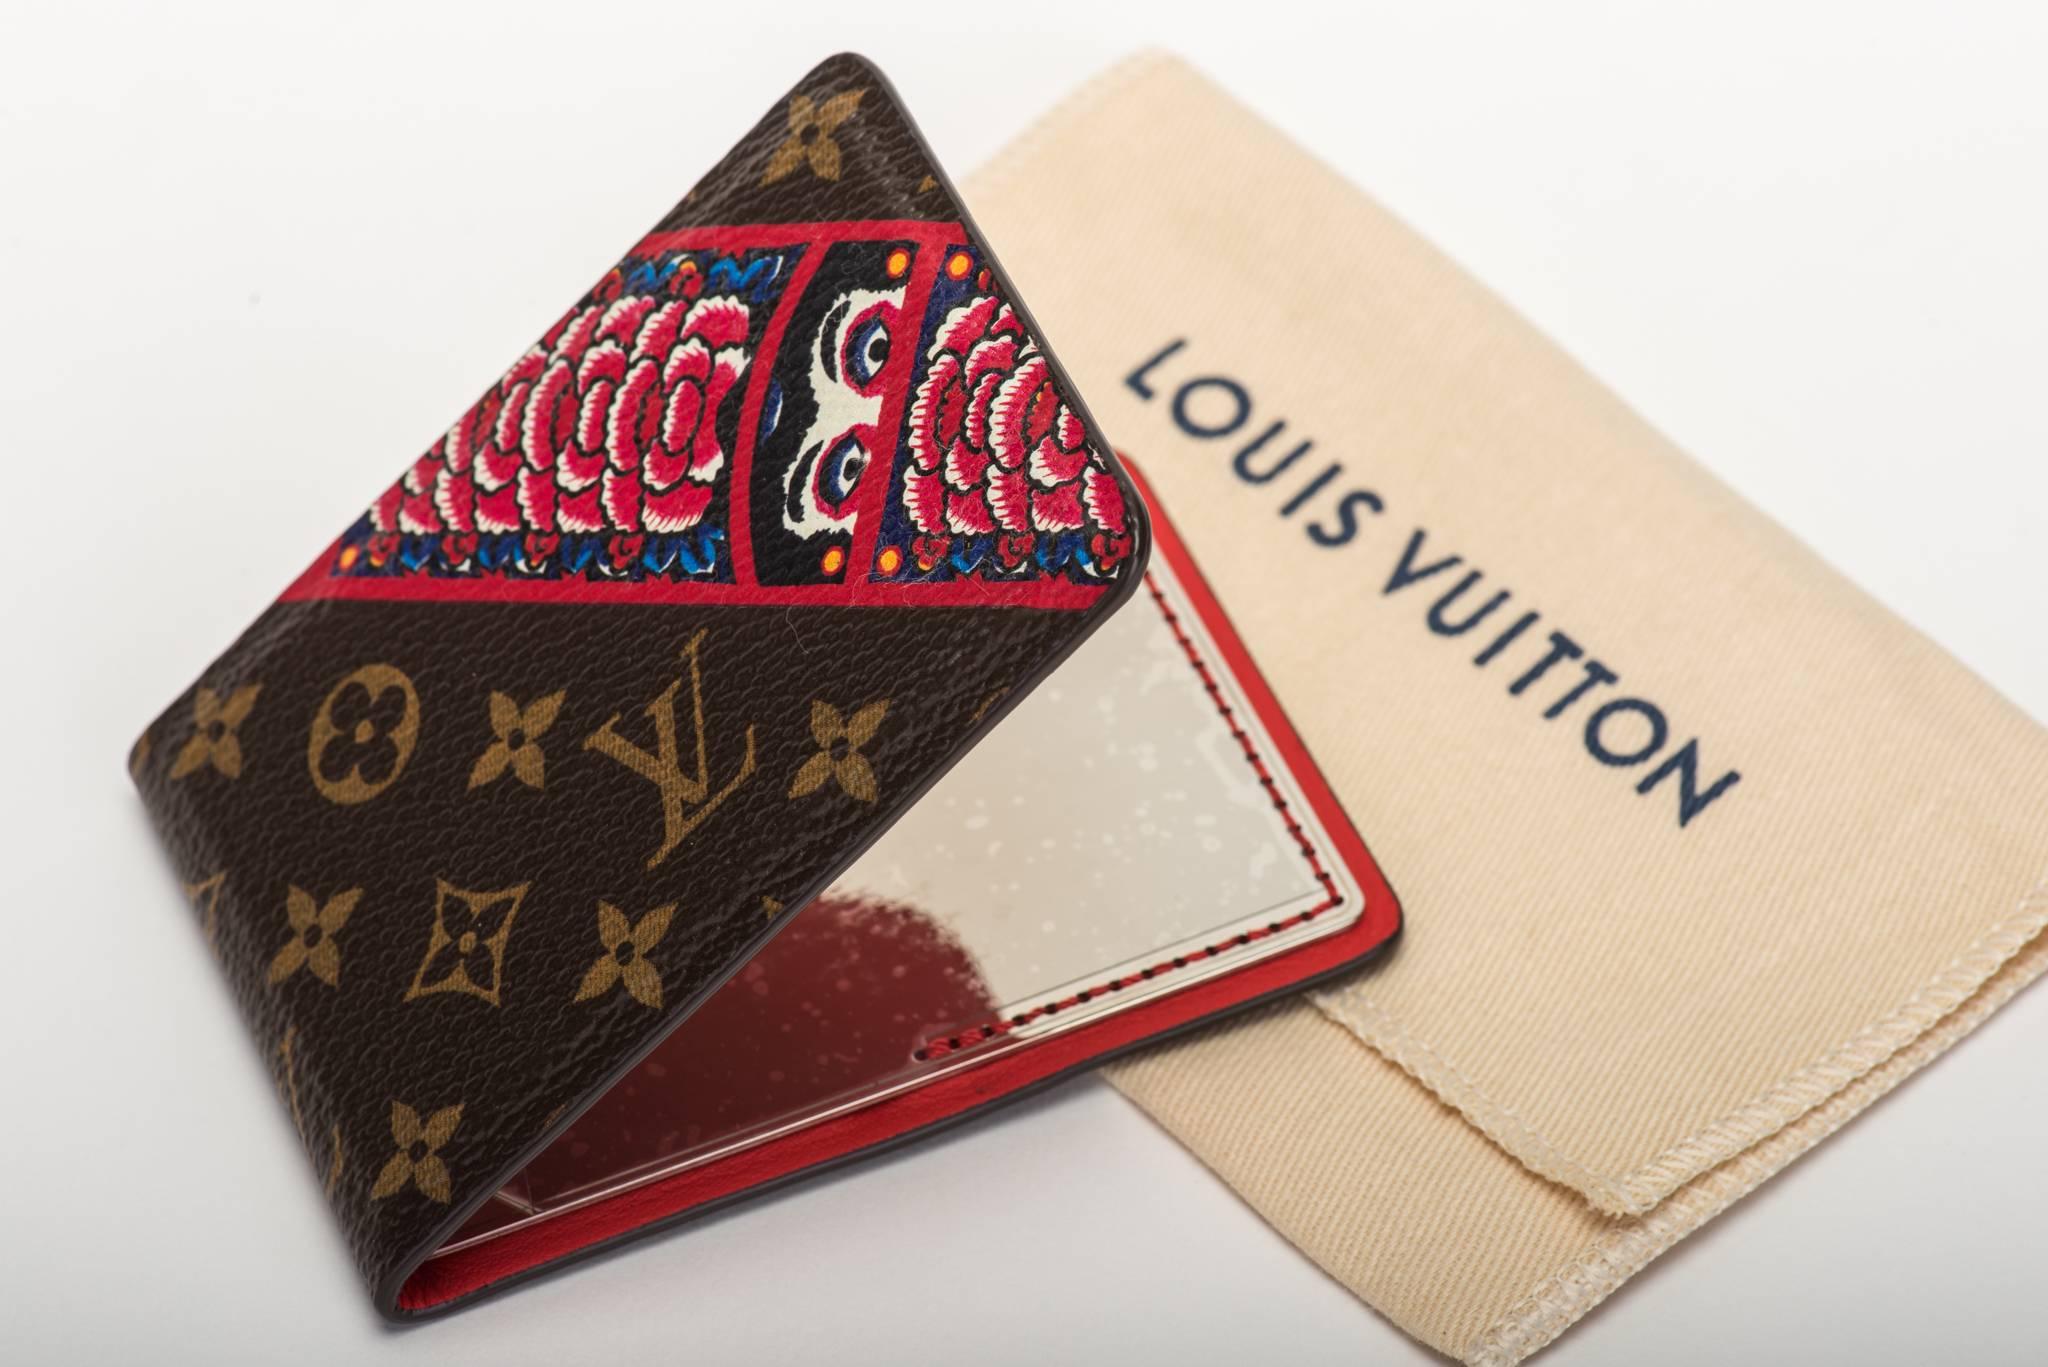 Louis Vuitton sold out kabuki spring summer 2018 collection bag flu mirror . Comes with original dust cover and envelope.